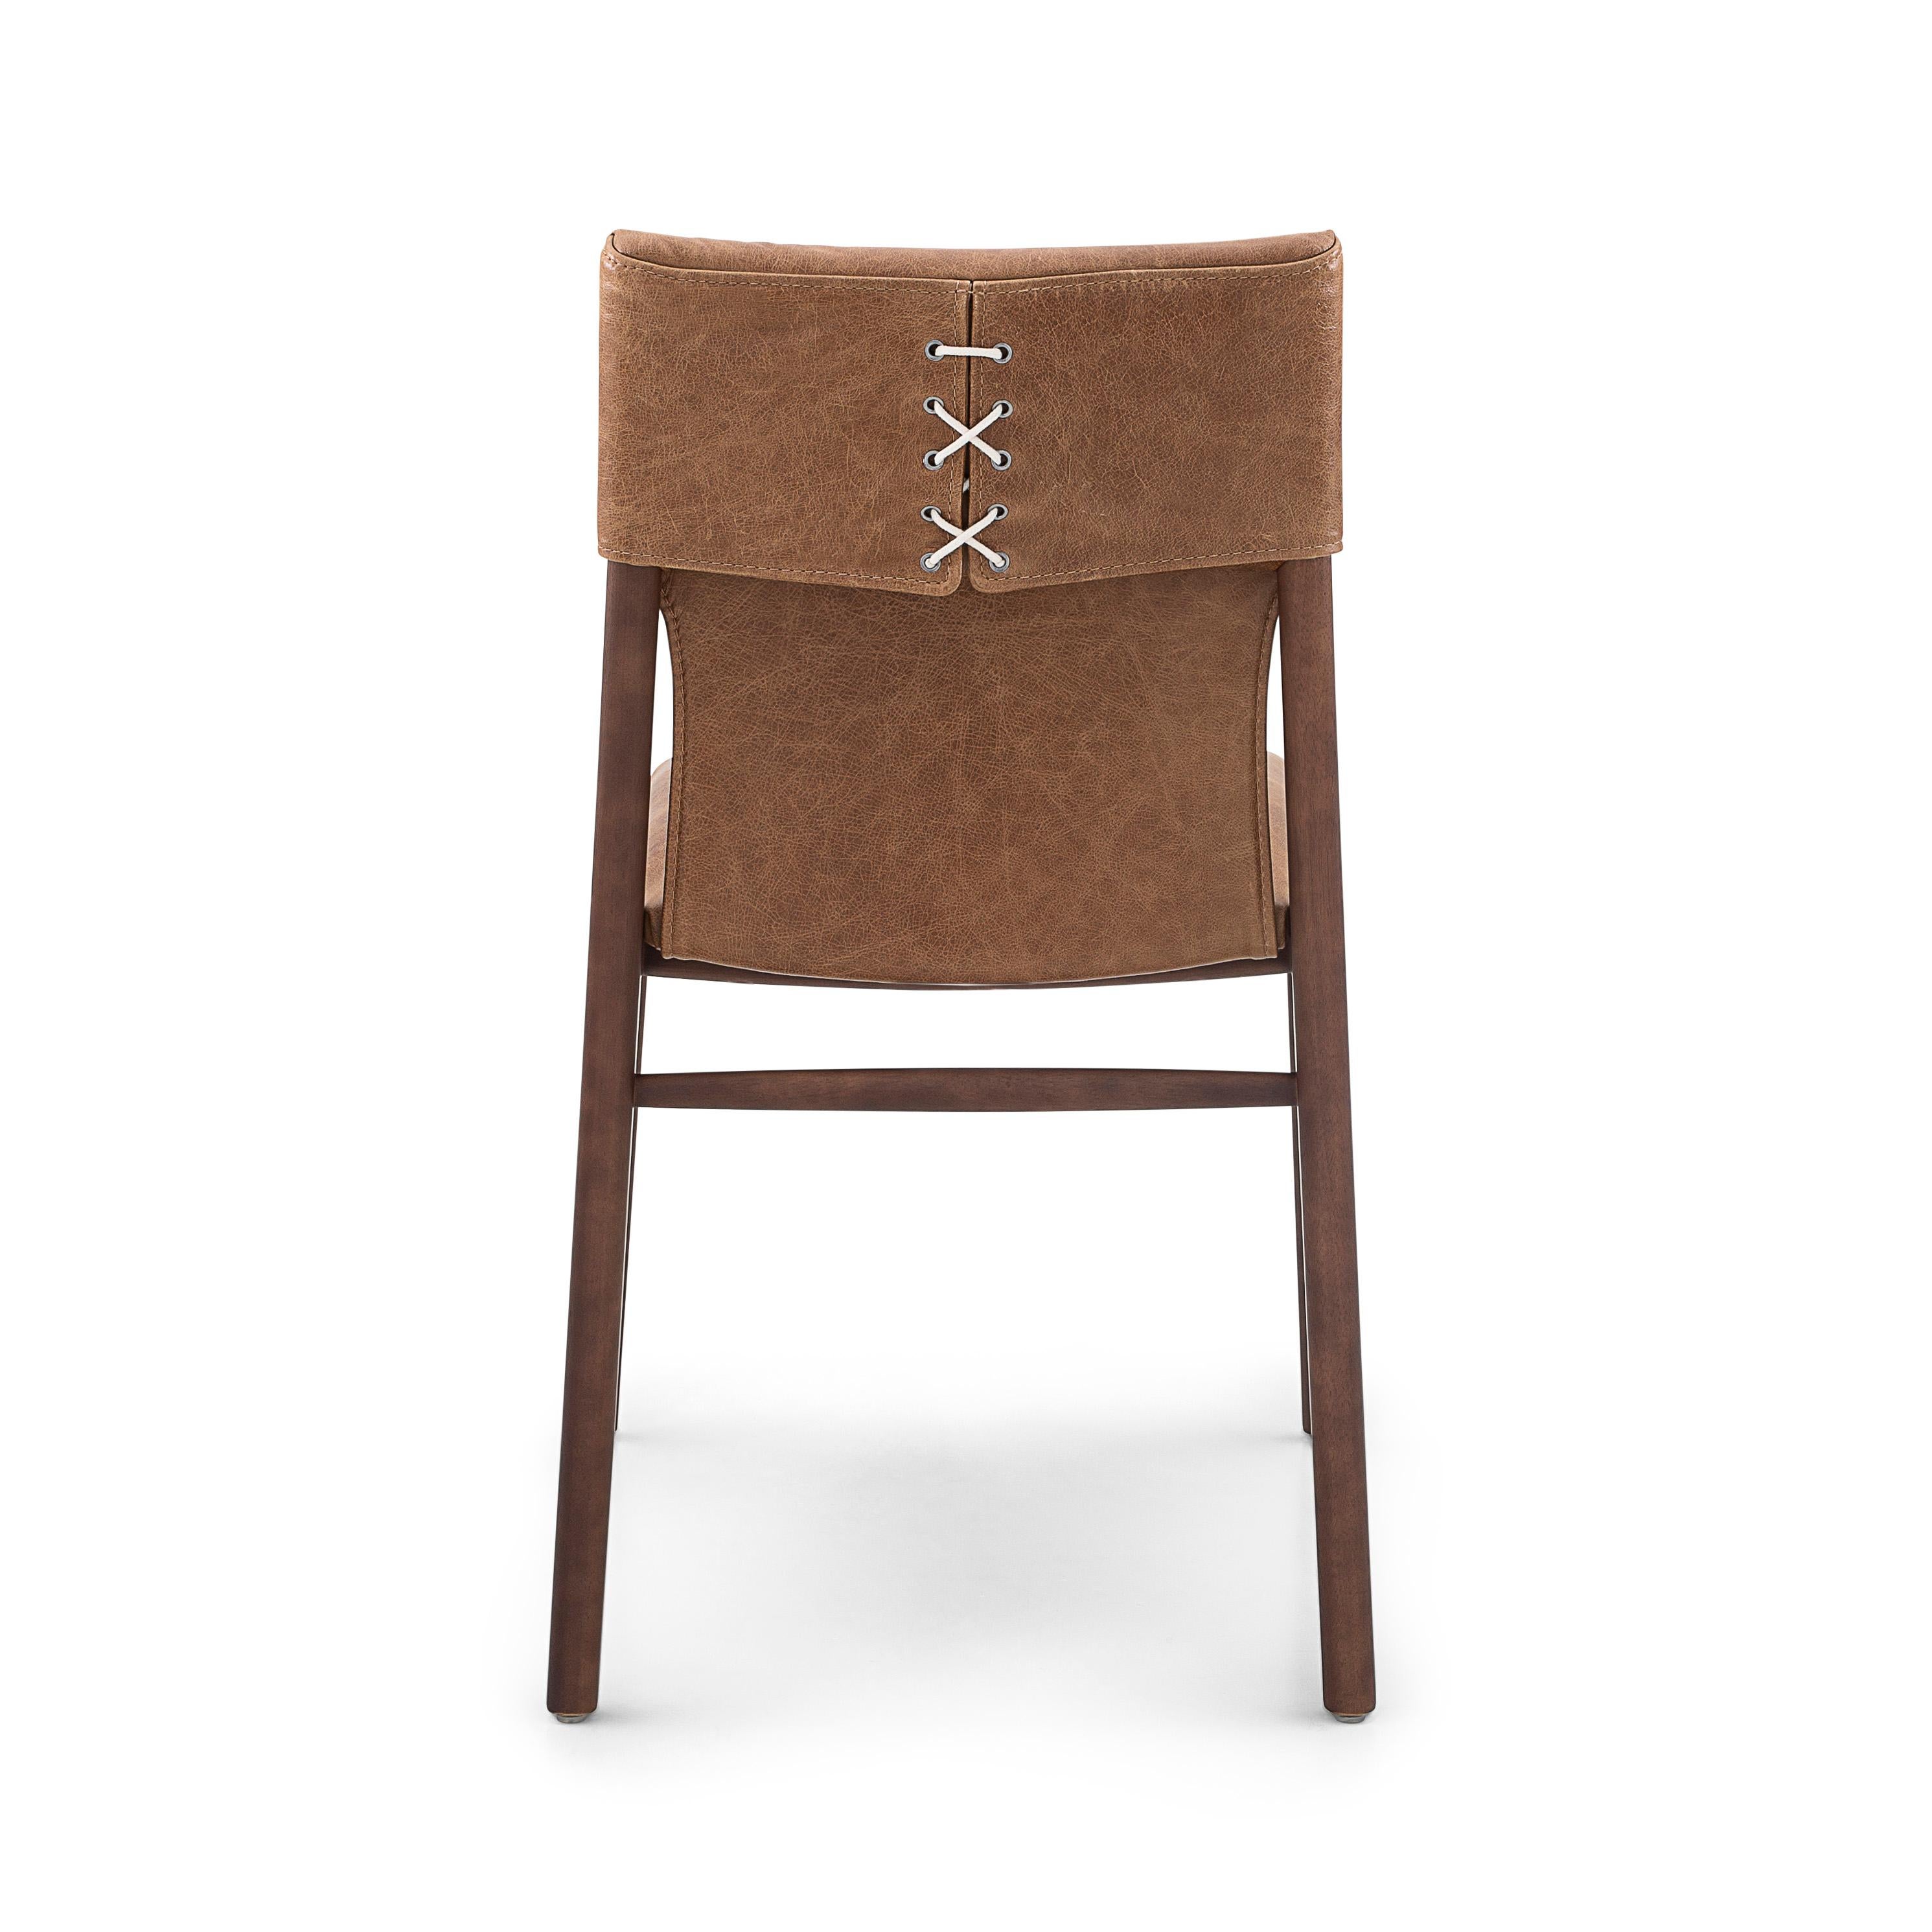 Tress Brown Leather Upholstered Dining Chair in Walnut Wood Finish, Set of 2 In New Condition For Sale In Miami, FL